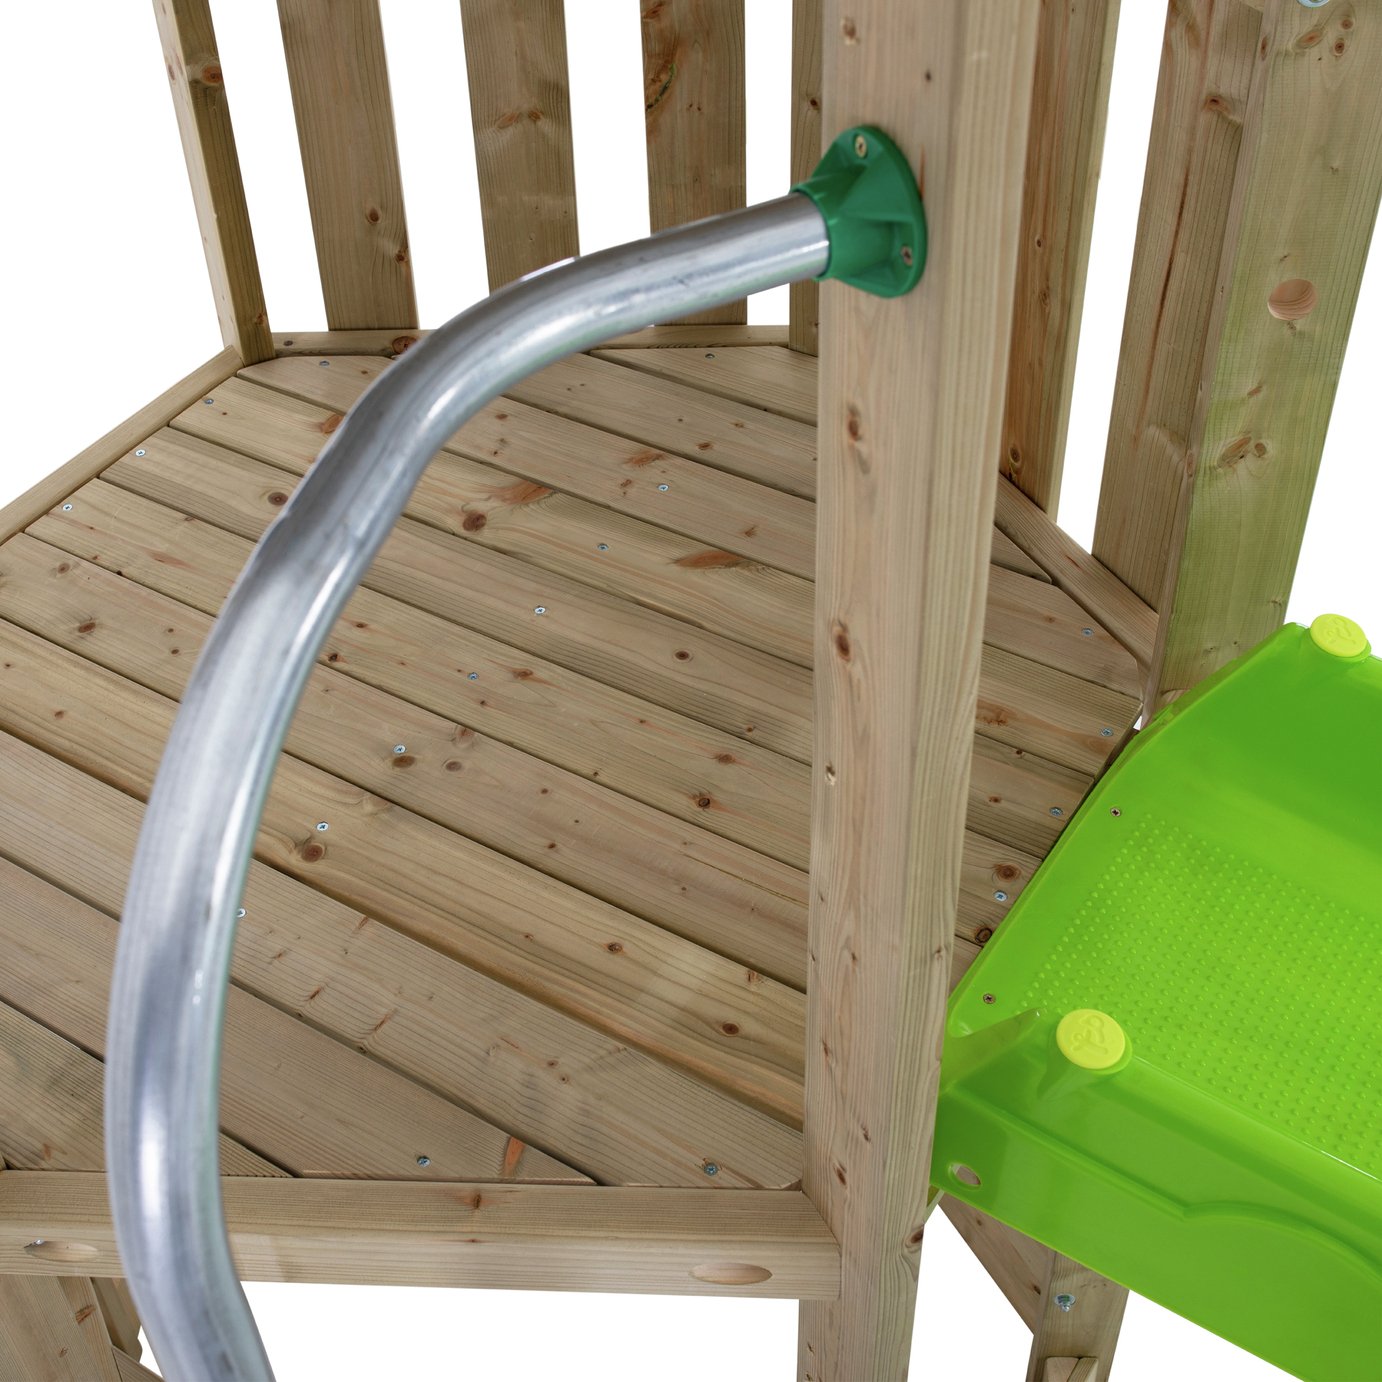 TP Castlewood Warwick Swing and Slide Review